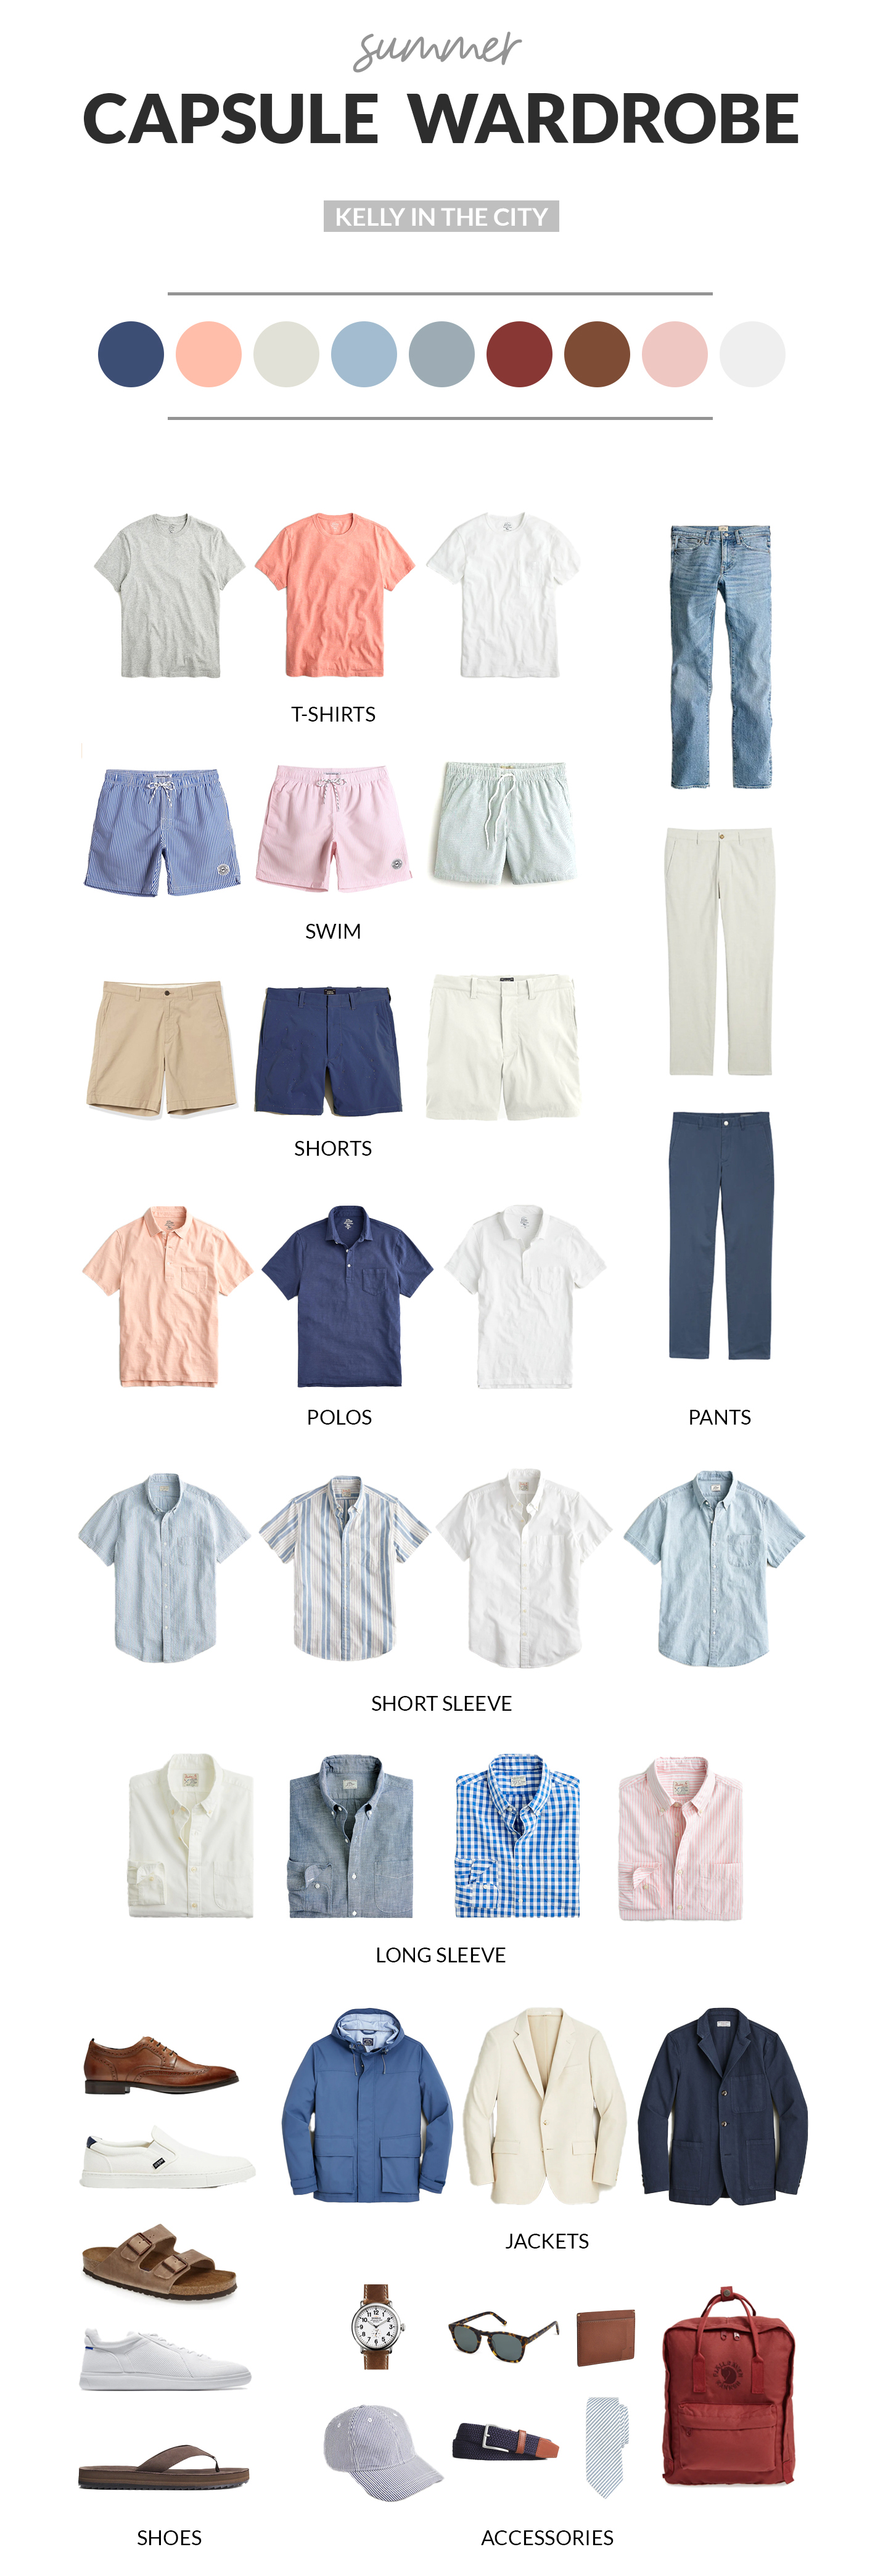 How to build a summer capsule wardrobe for maximum style options